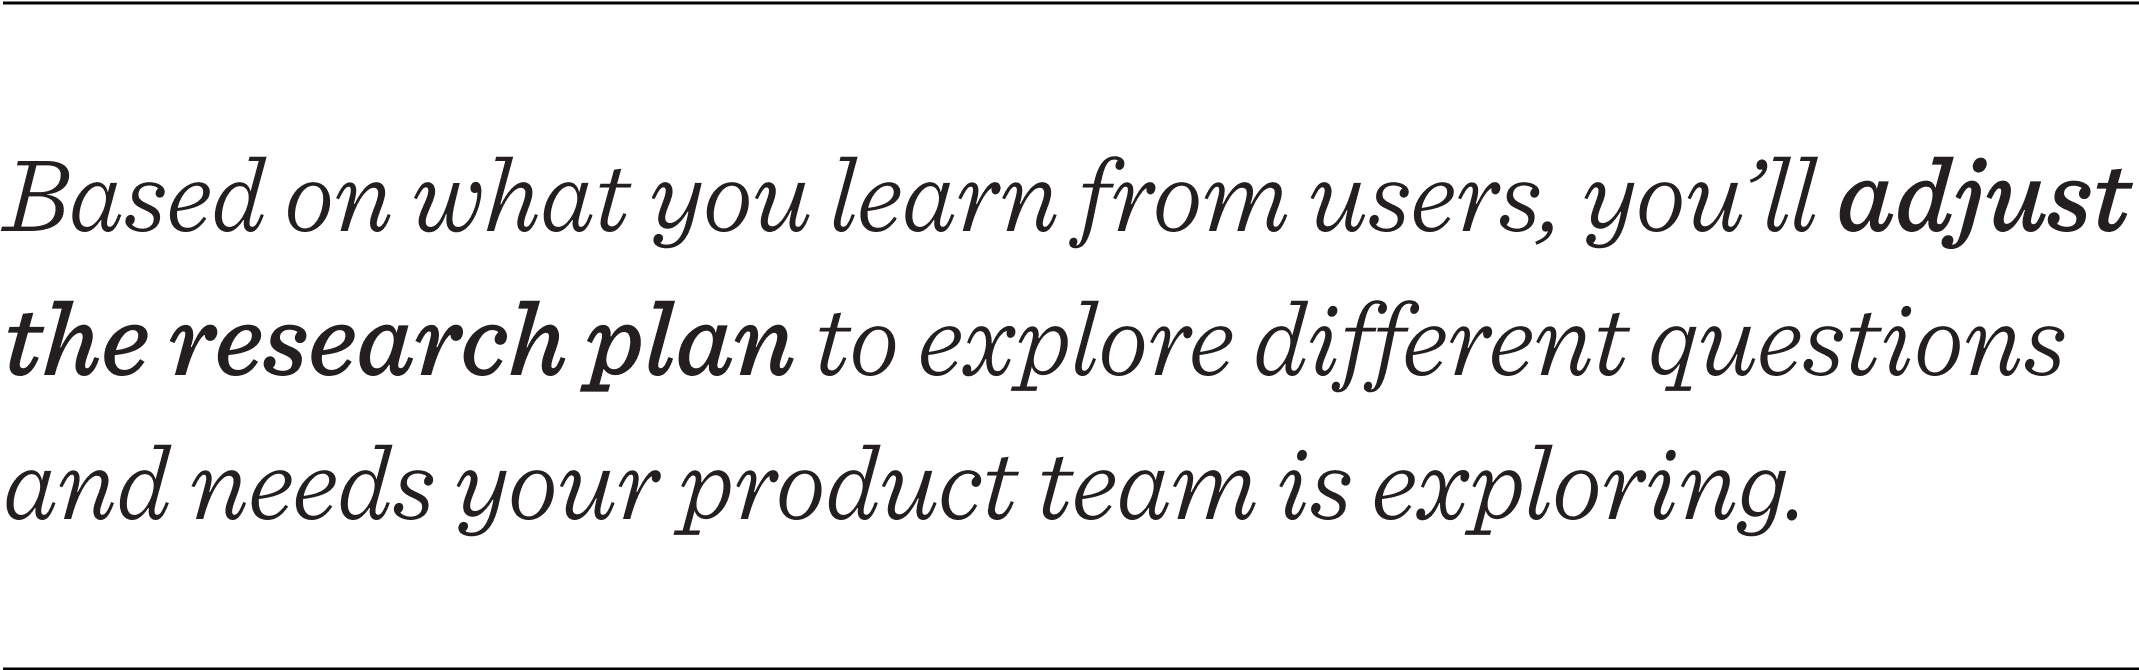 Based on what you learn from users, you’ll adjust your research plan to explore different questions and needs your product team is exploring. 